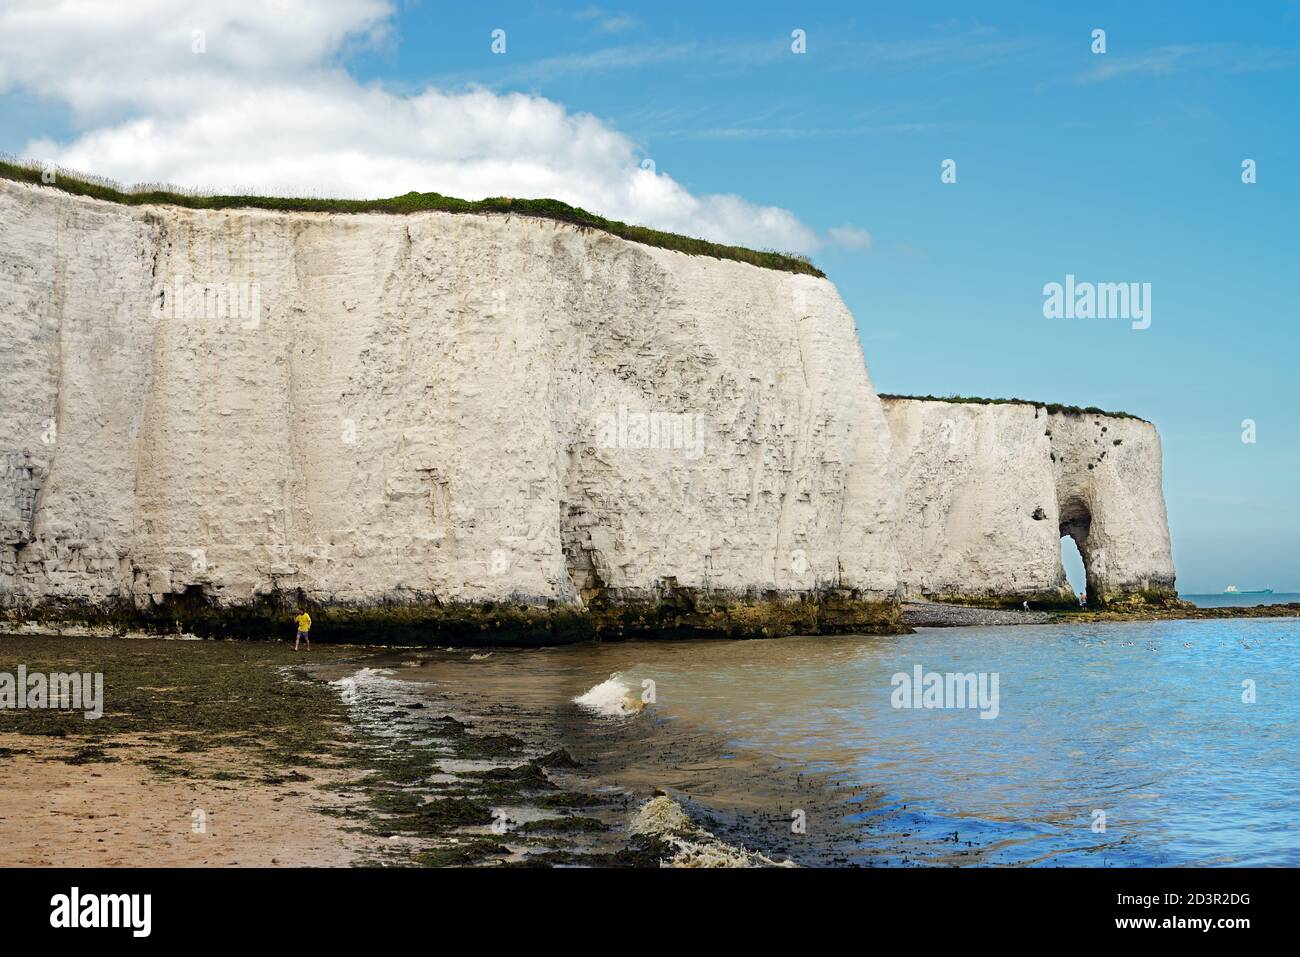 Botany Bay in the county of Kent (south east coast of England) comprises cliffs made of chalk that formed during the Cretaceous period. Stock Photo